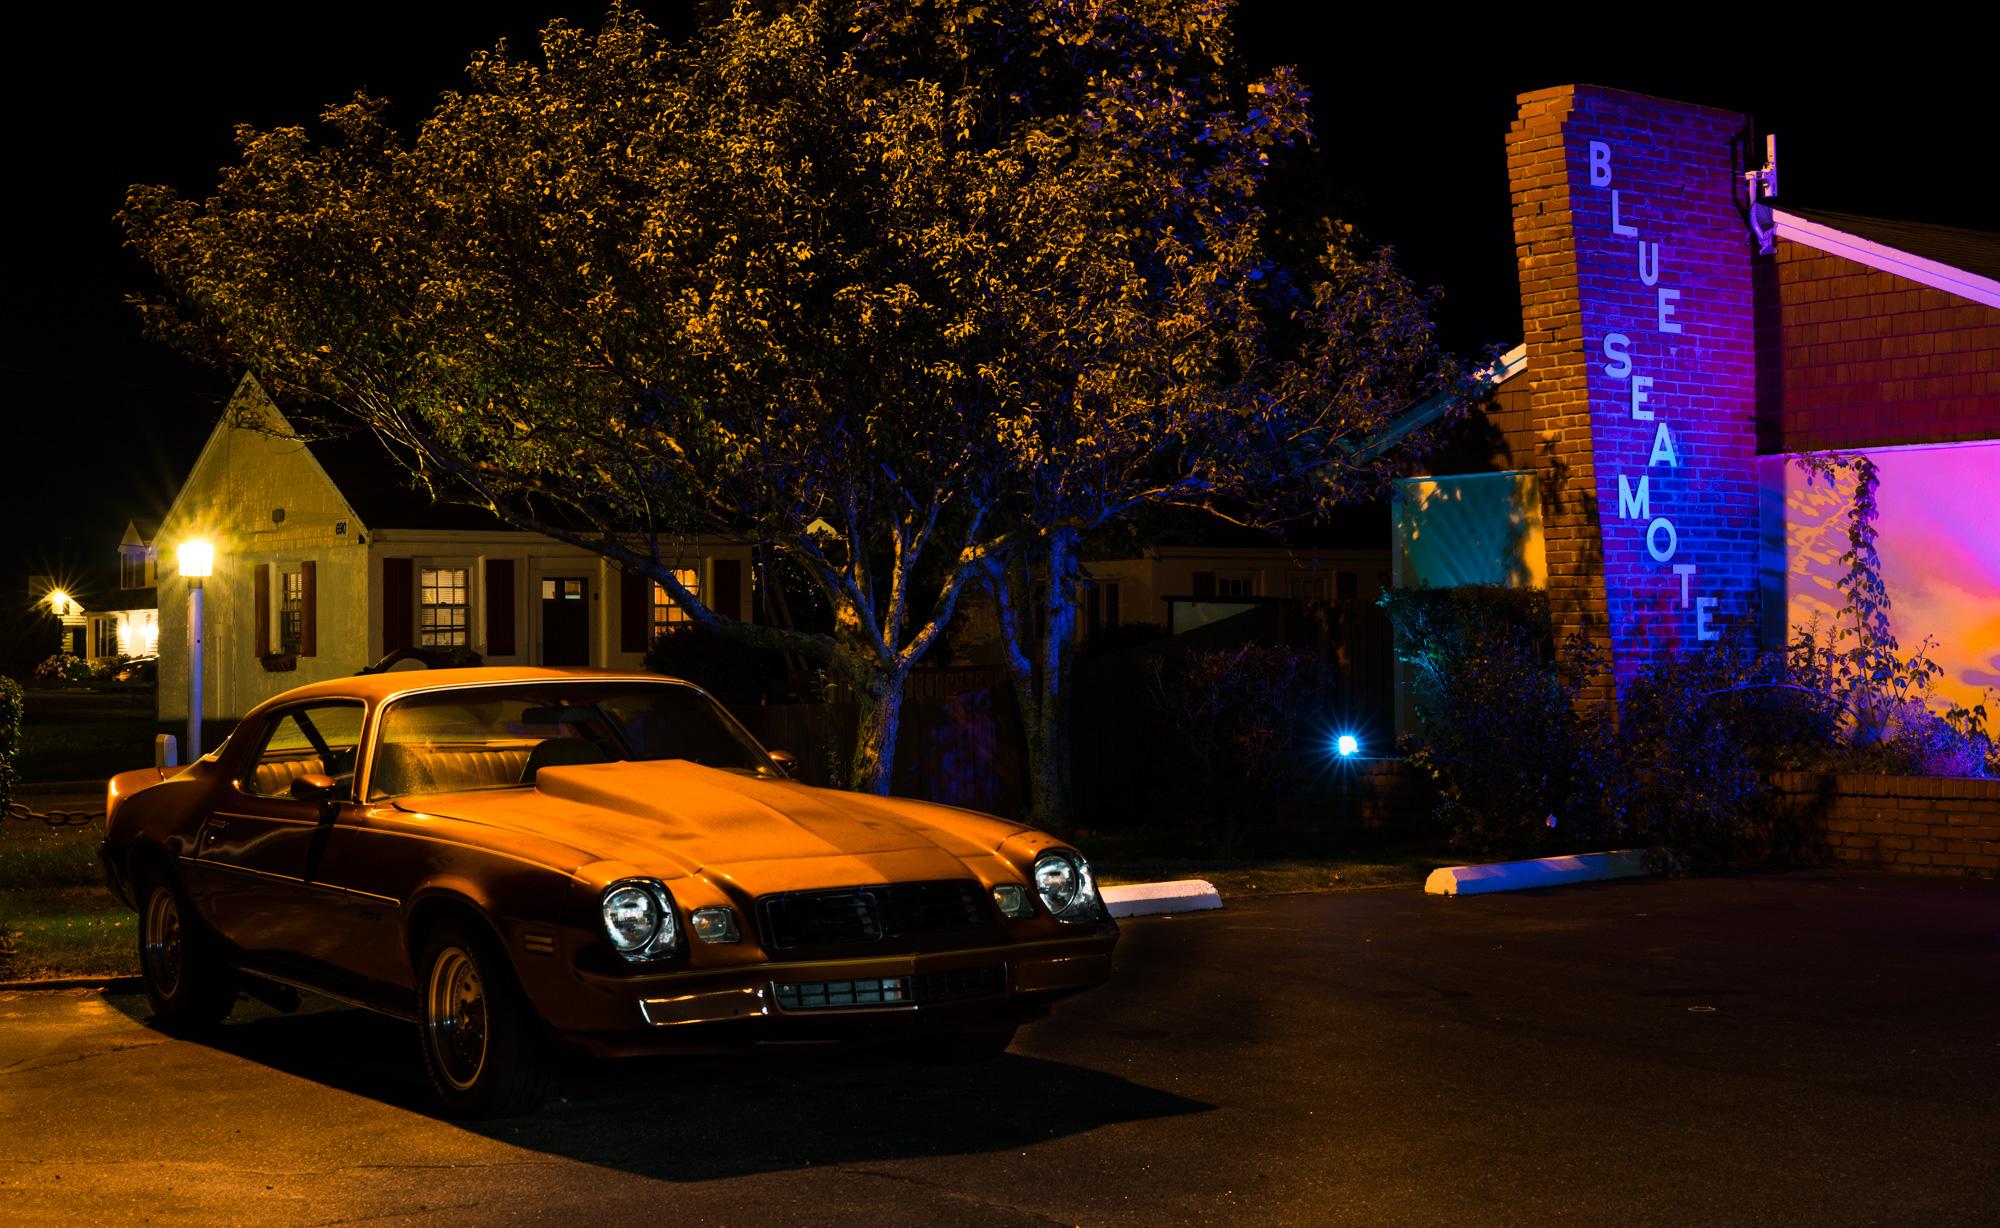 Howard Lewis Landscape Photograph -  Limited Edition Color Photograph - Car, Camaro, Hotel, Night 20 x 24